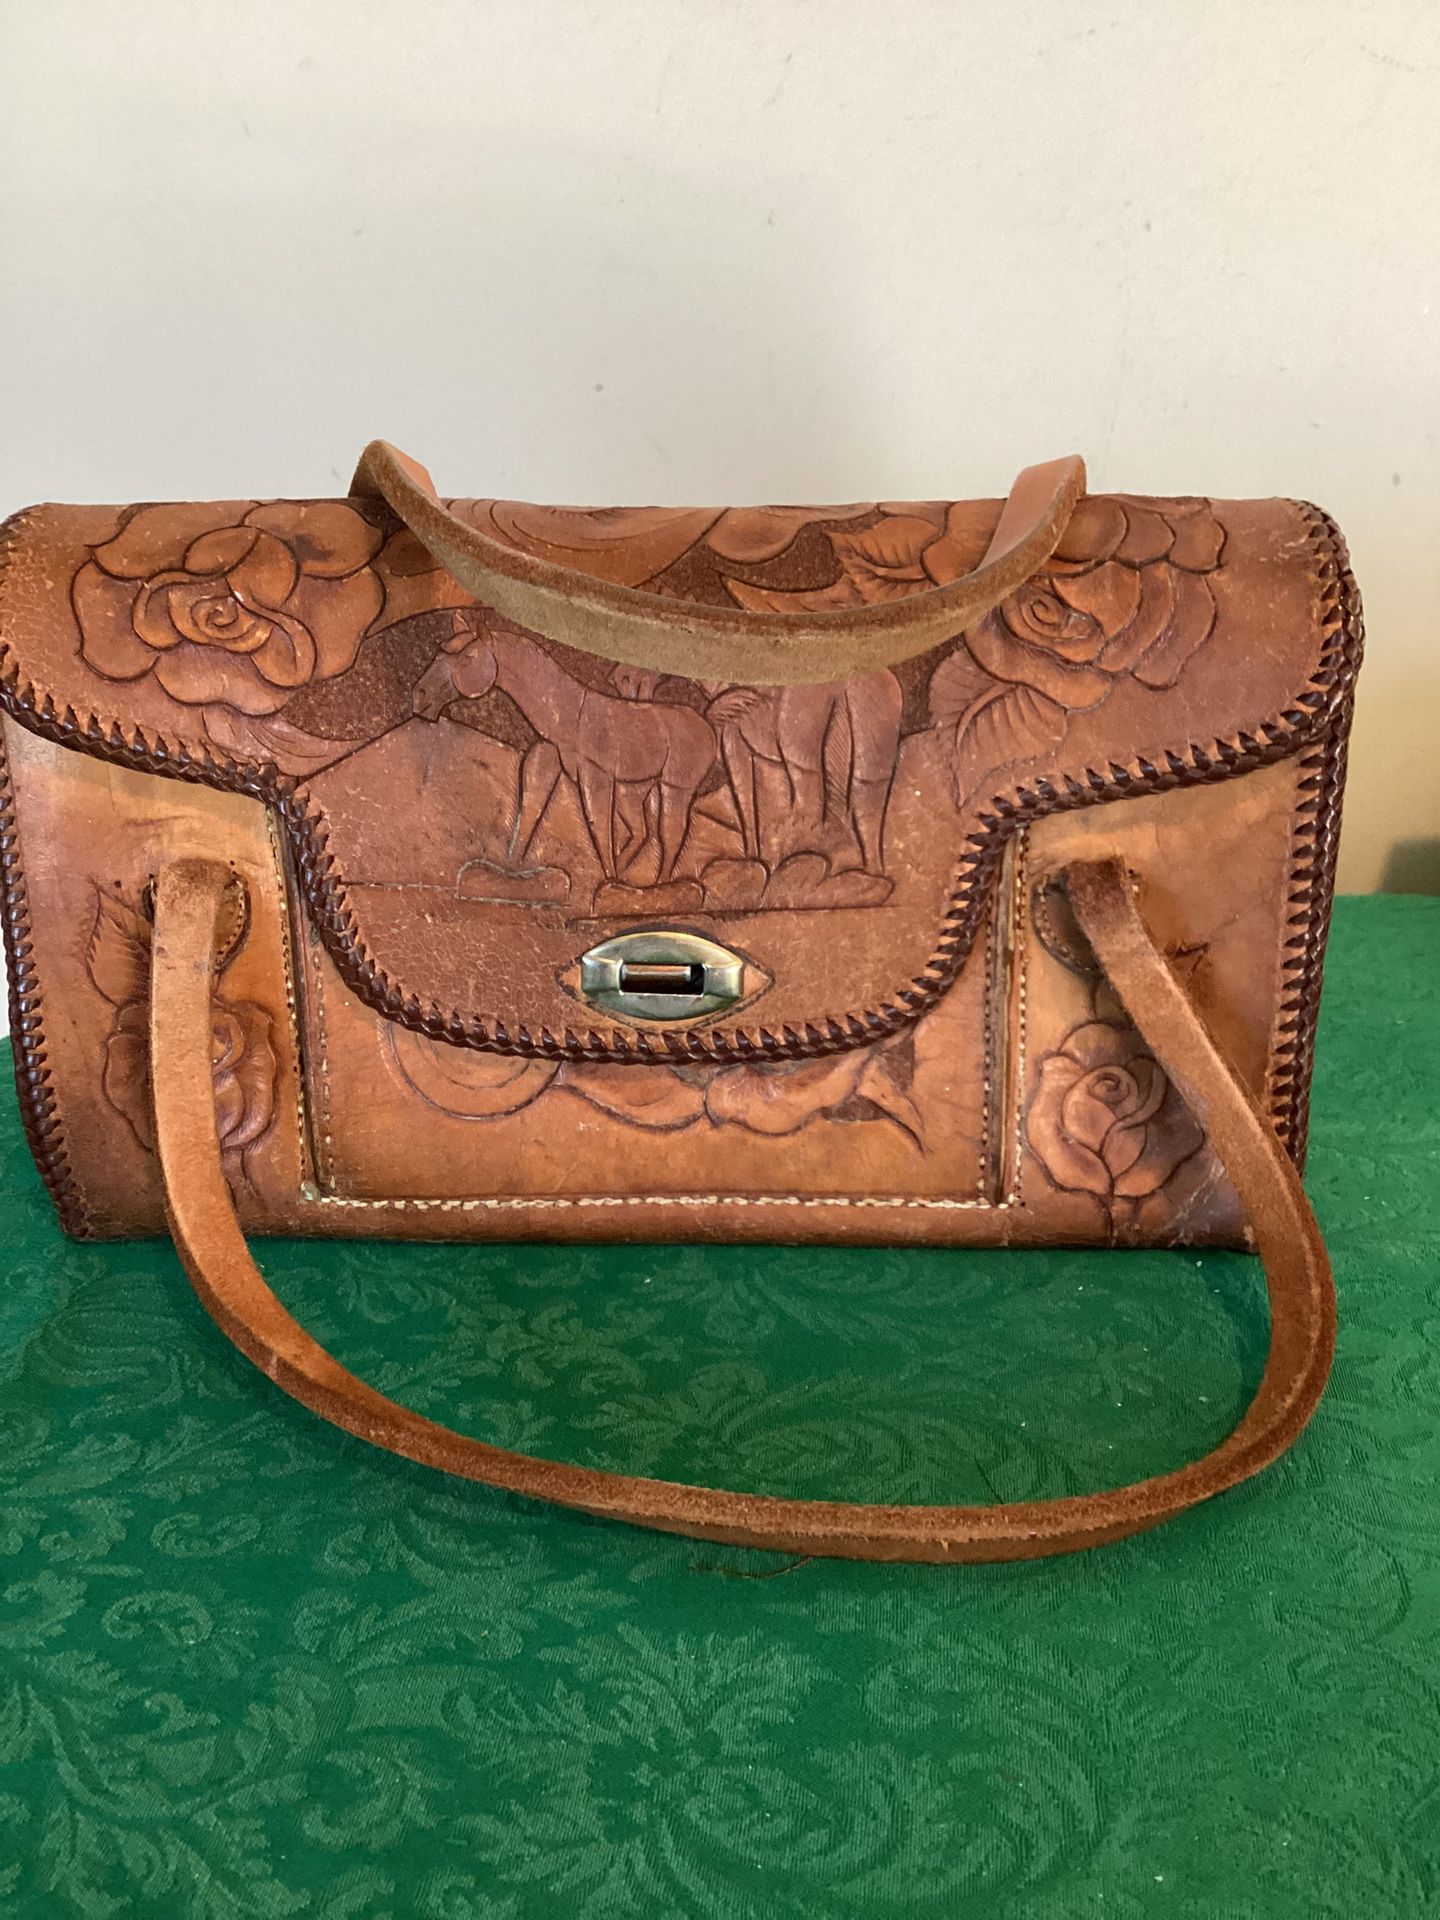 Vintage Tooled Leather Purse Embossed With Horses, Flowers & Leaves Fancy Edge